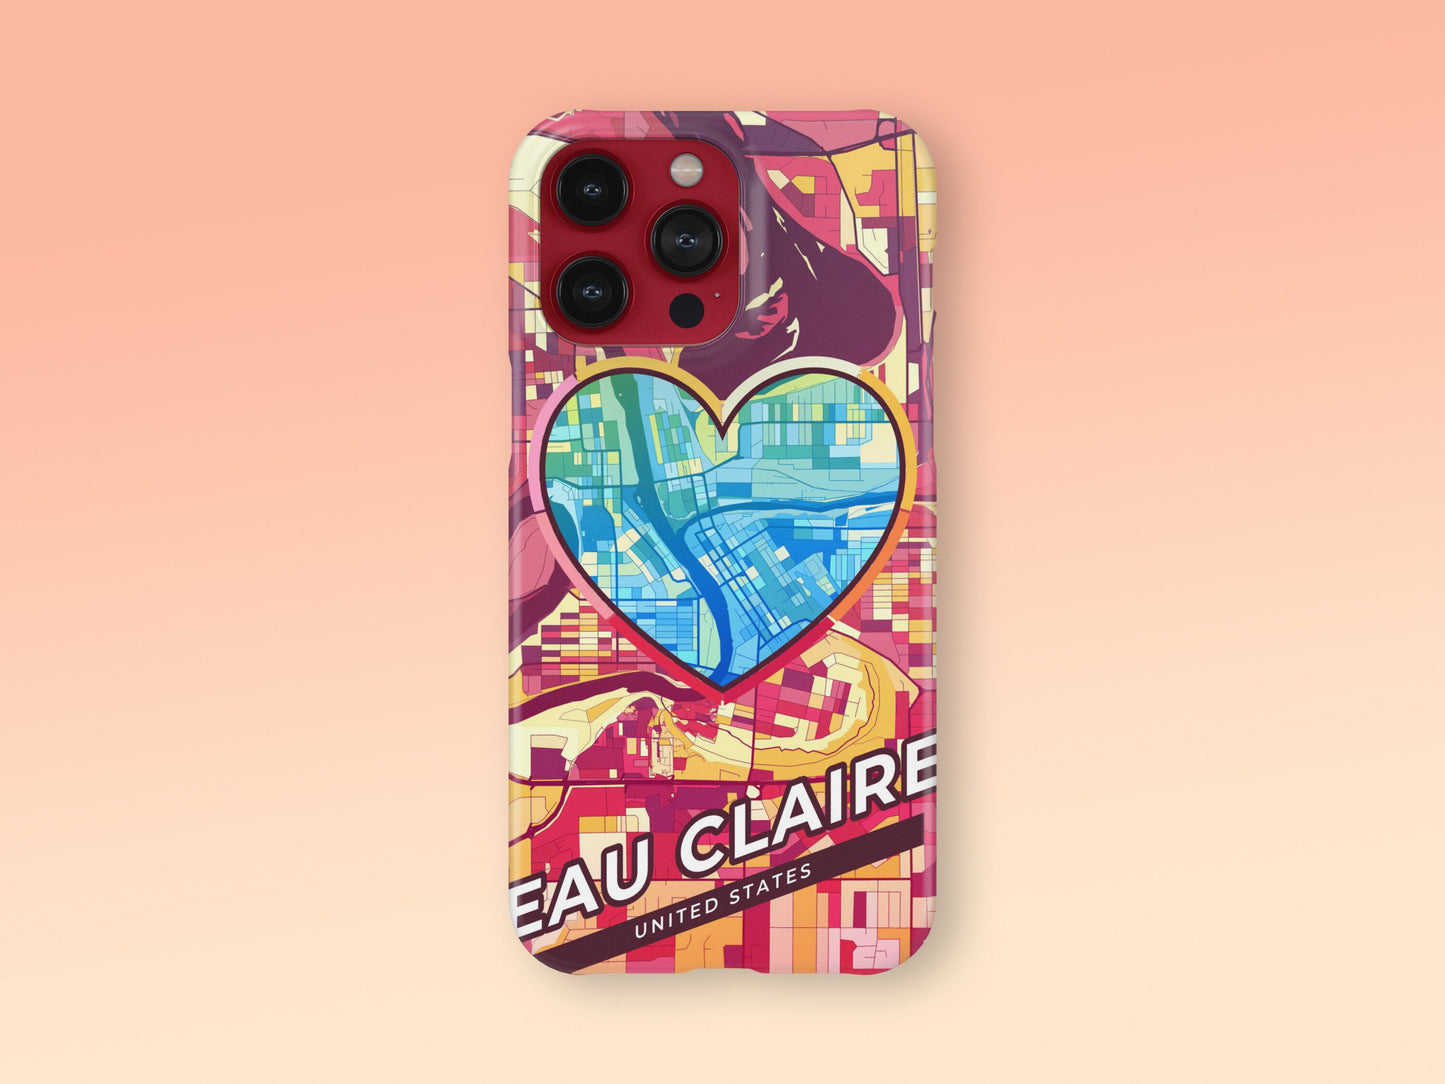 Eau Claire Wisconsin slim phone case with colorful icon. Birthday, wedding or housewarming gift. Couple match cases. 2